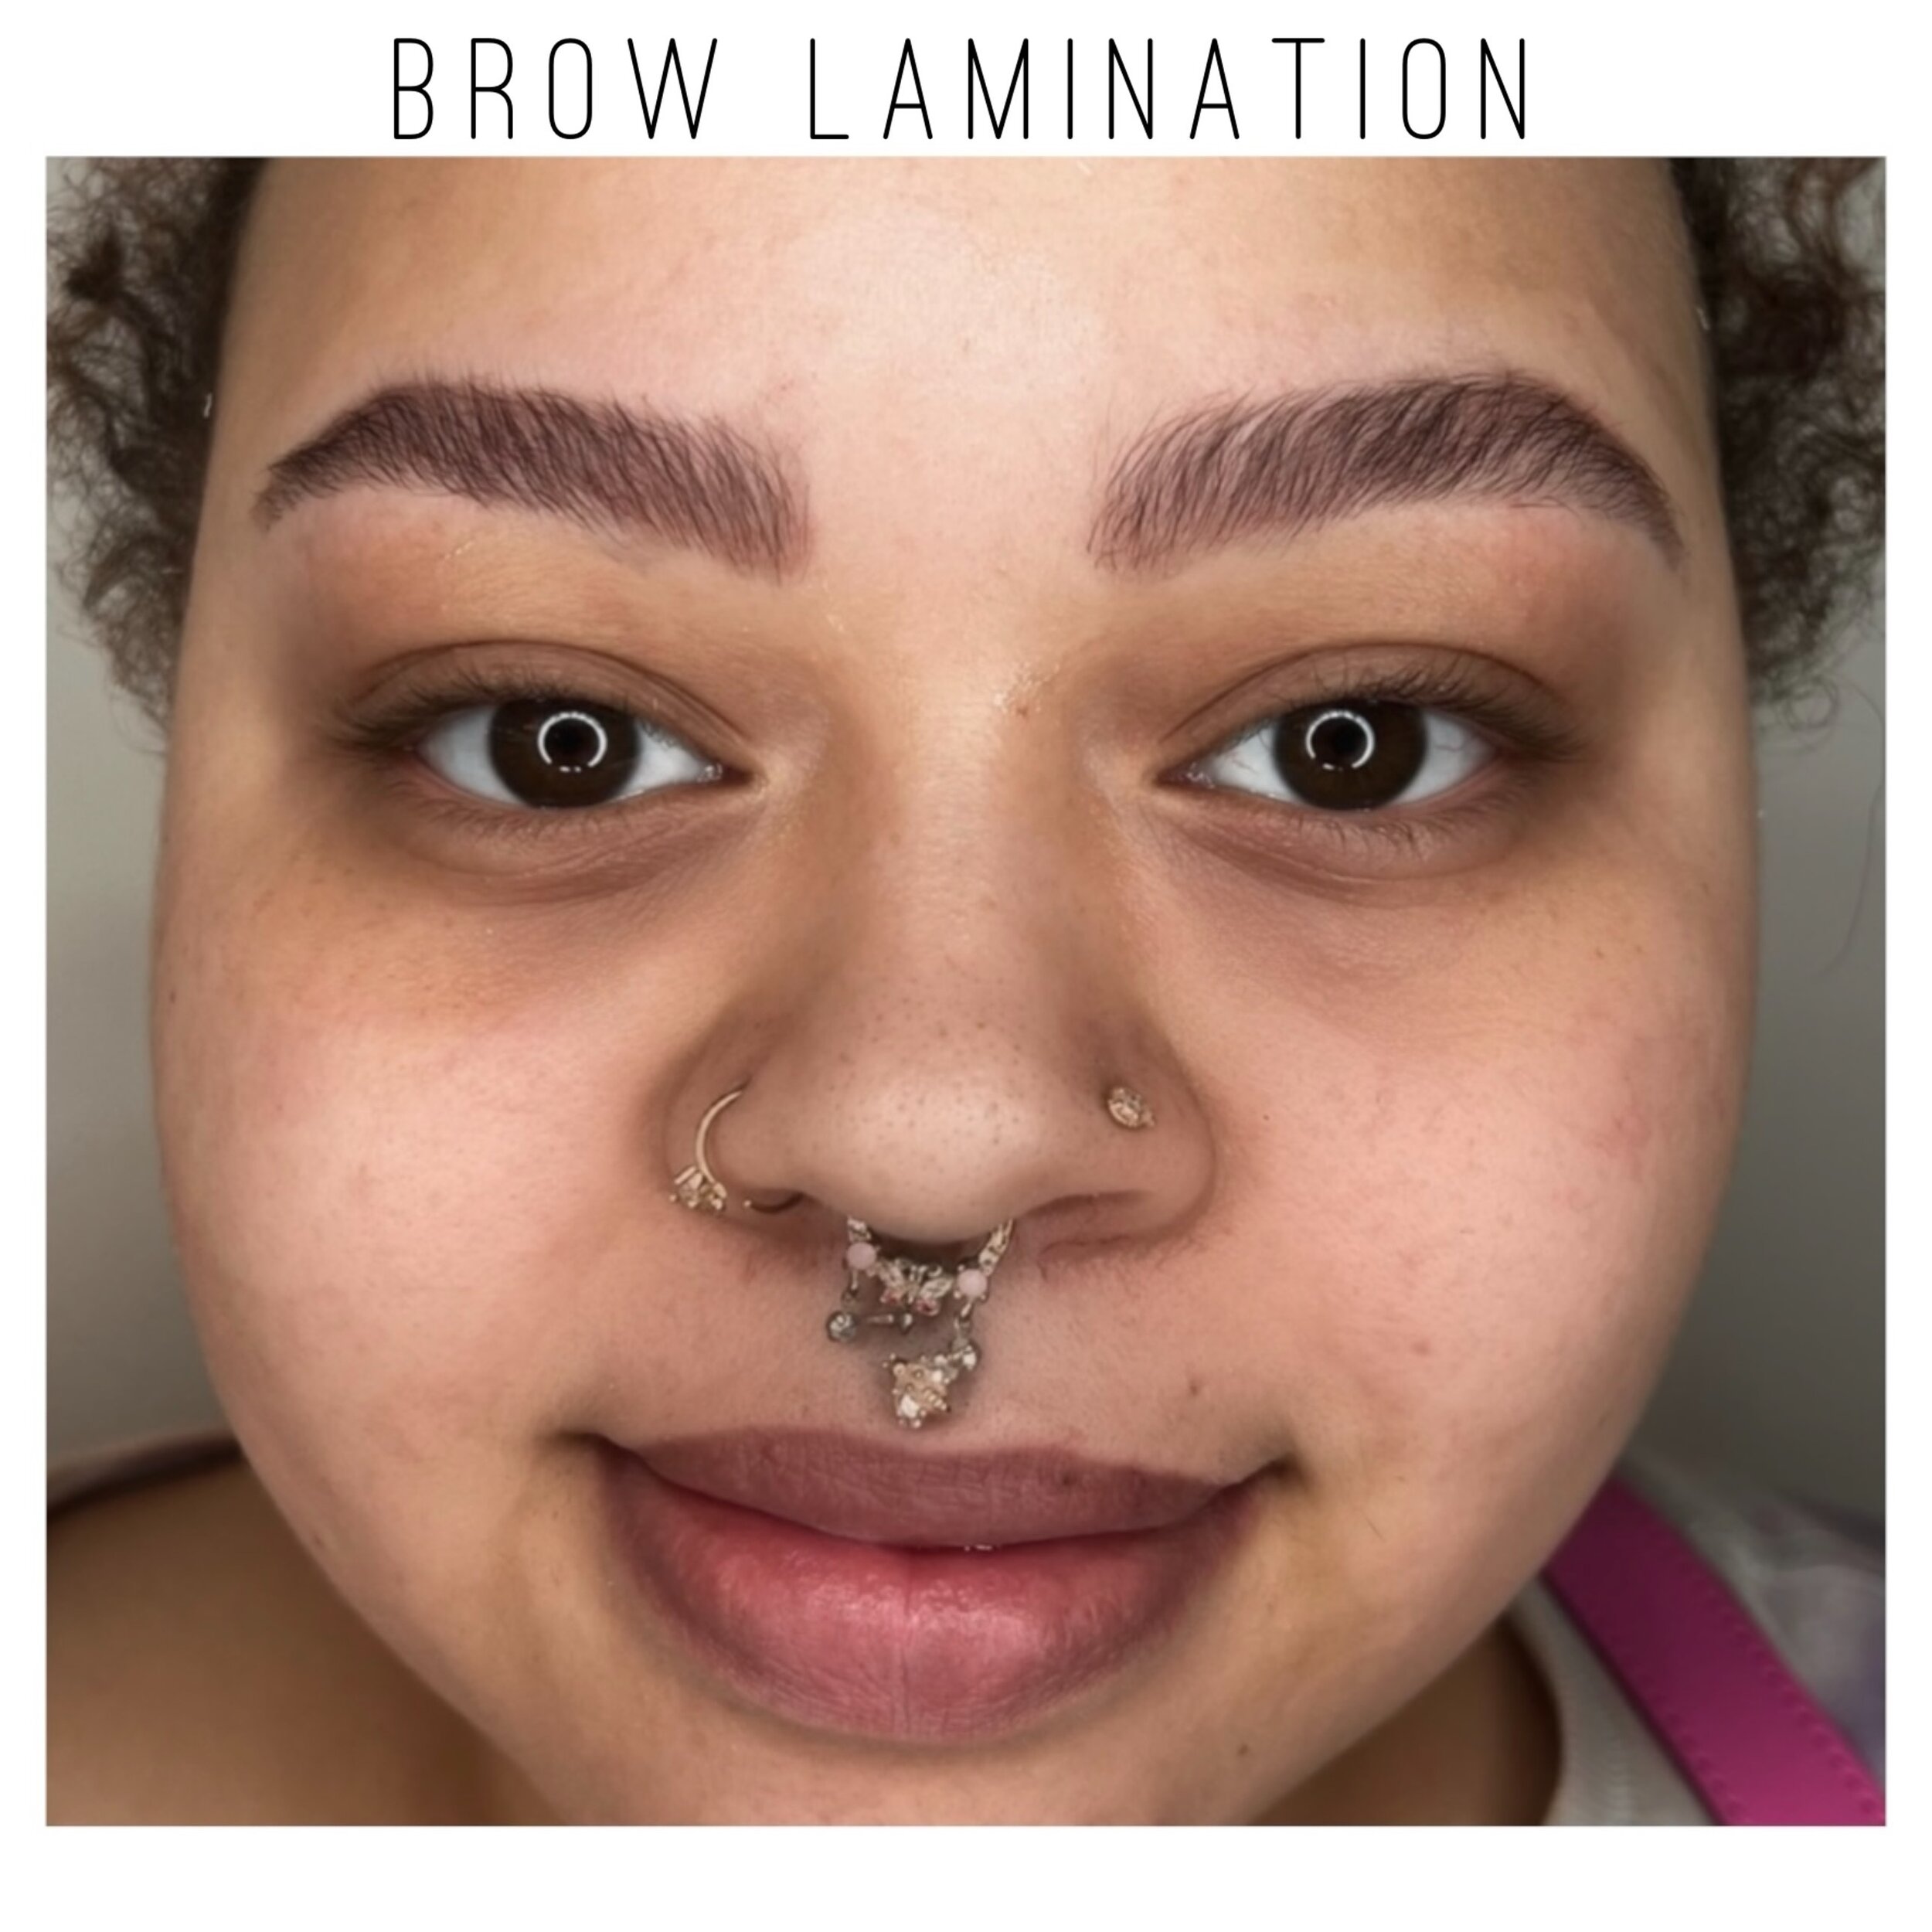 I&rsquo;m loving these brows!! Life isn&rsquo;t perfect, but your brows can be. Ready to become a total brow boss?

Brow lamination is similar to a lash lift and is great for all brow types. We use a mild perming solution to straighten your eyebrow h